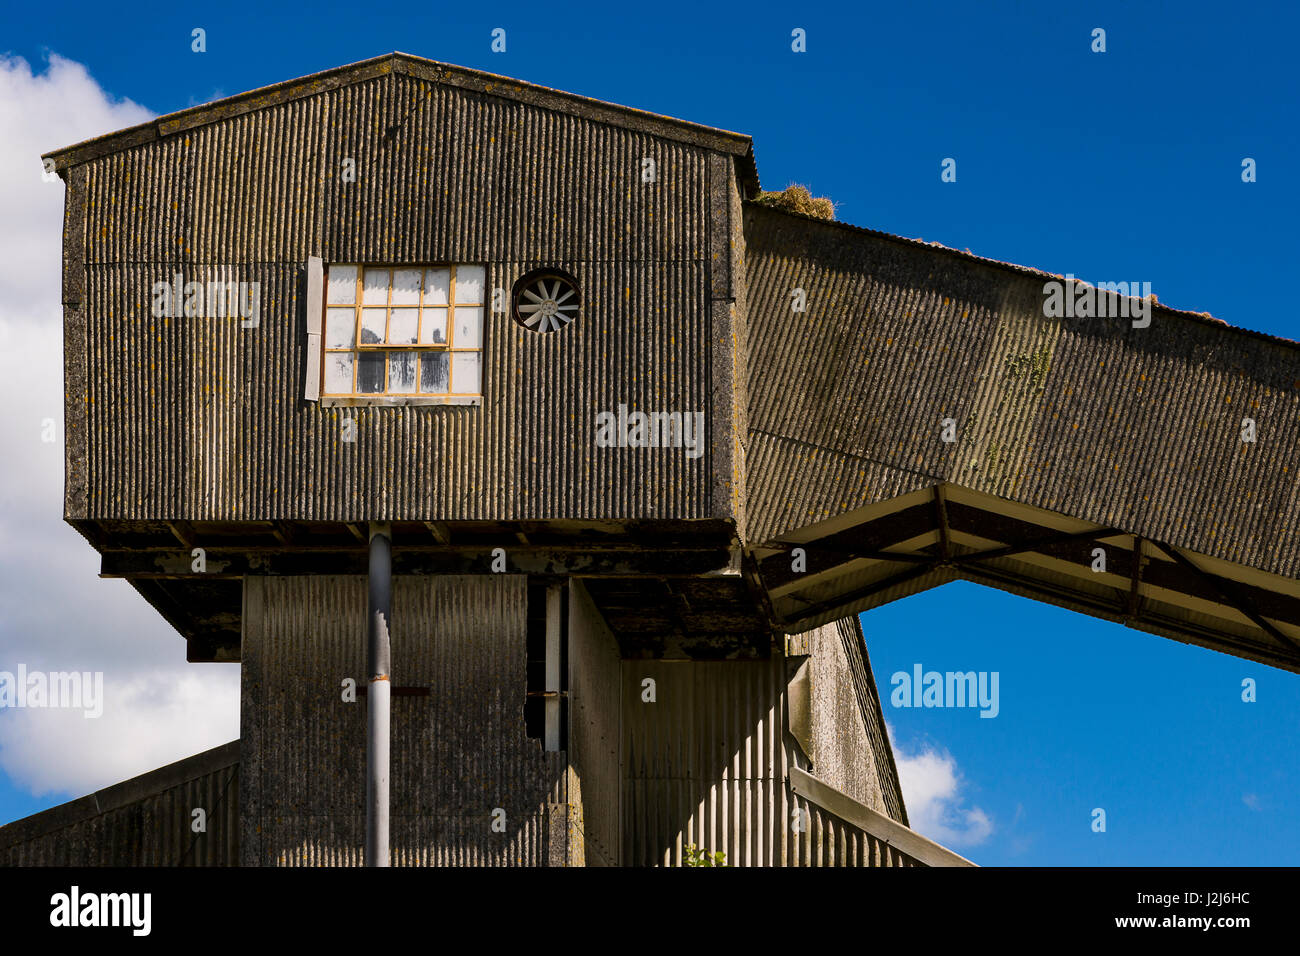 Section of a China clay industrial production facility in Cornwalls, Par Stock Photo